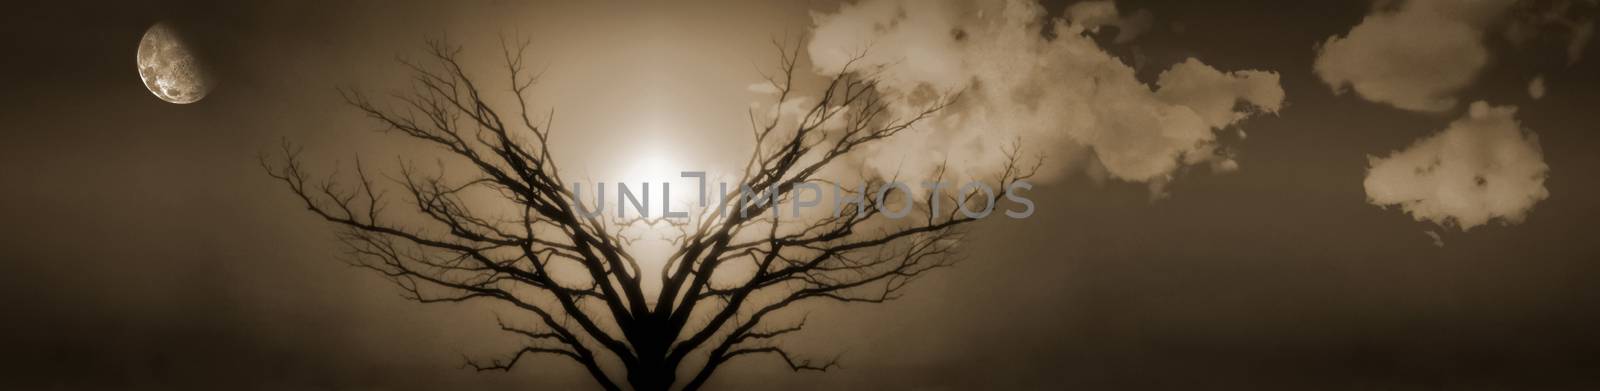 Mystic Tree of Life. Moon in Cloudy Sky. Sunset or Sunrise. 3D rendering